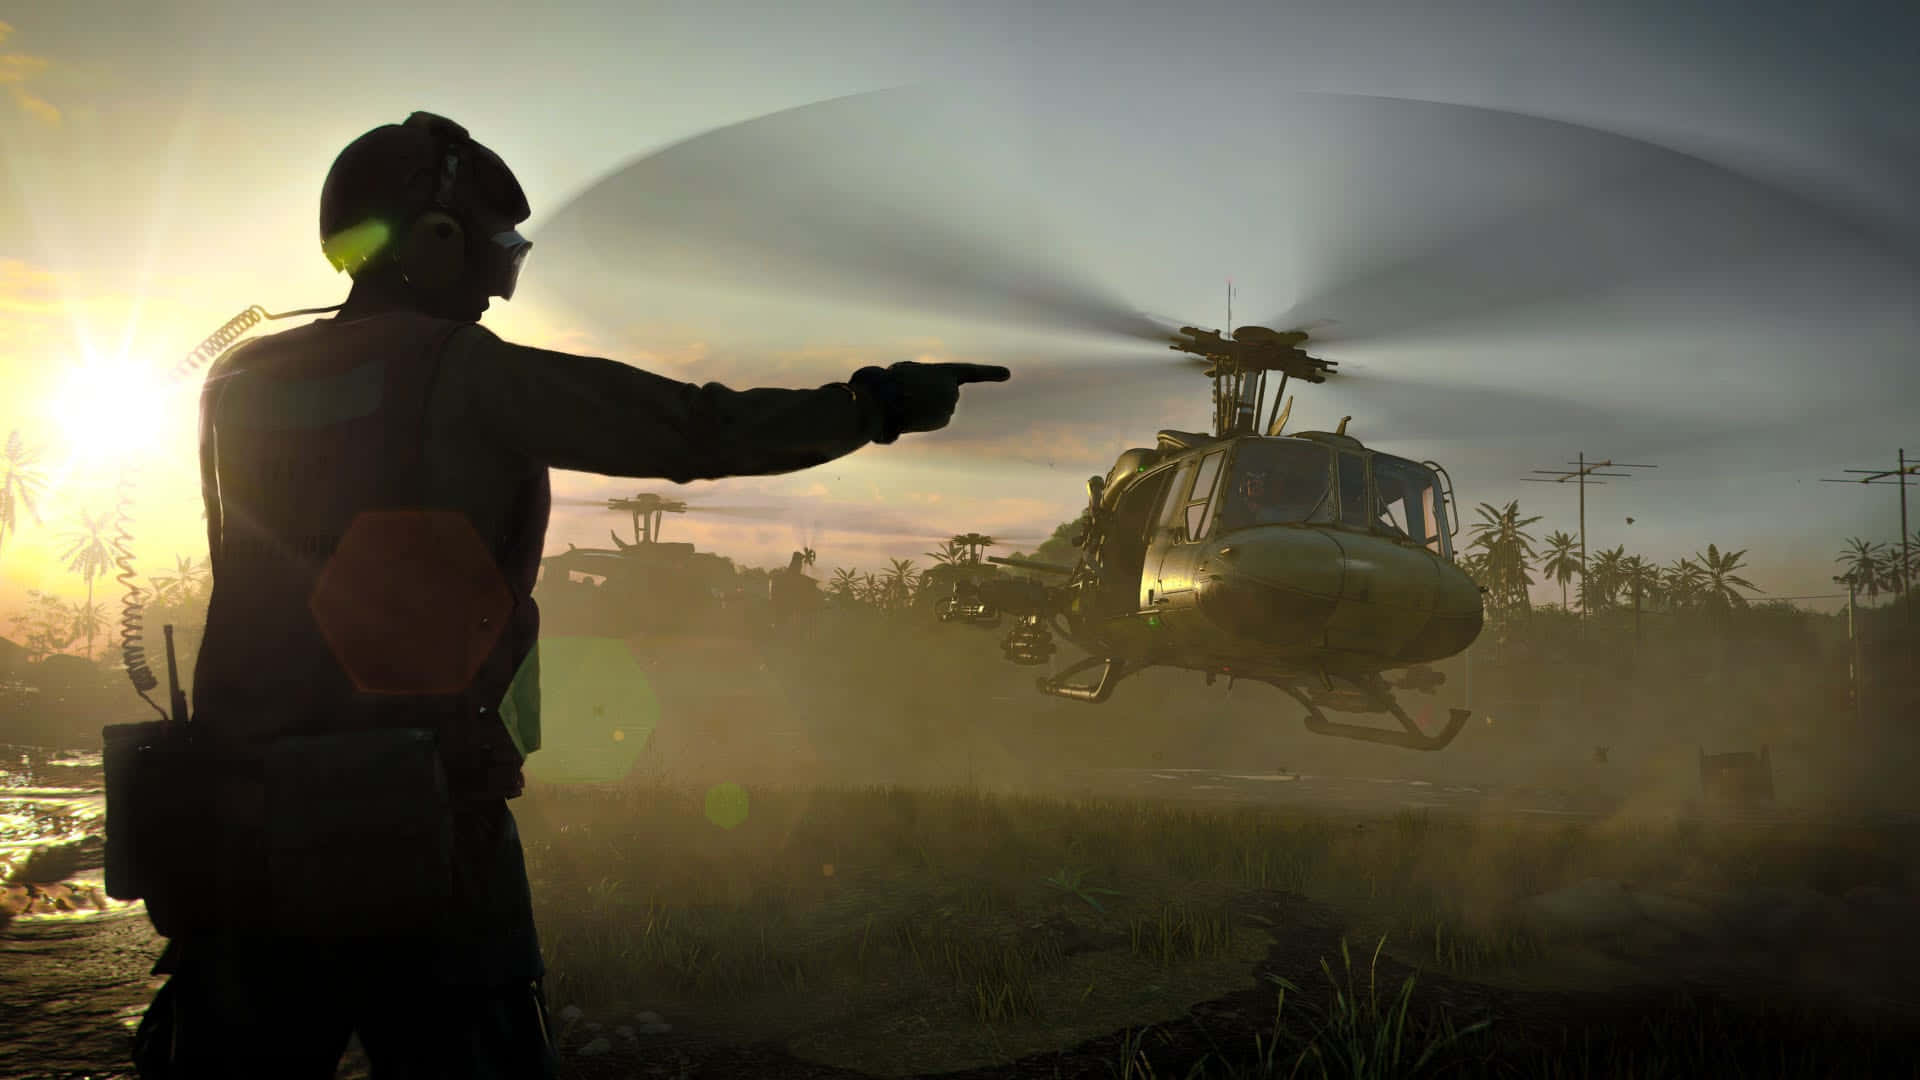 A Man Is Pointing At A Helicopter In The Distance